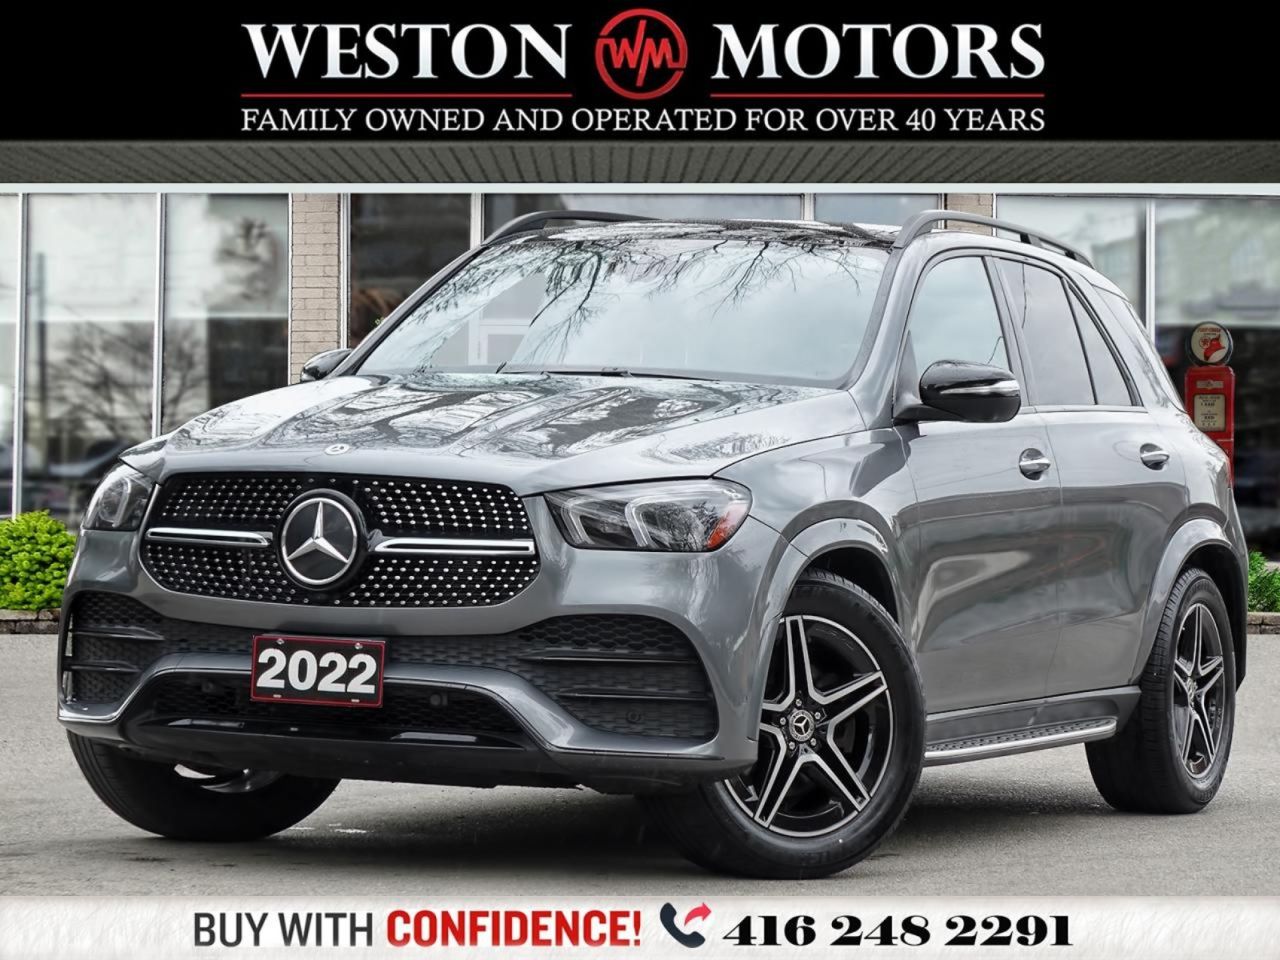 2022 Mercedes-Benz GLE350 4MATIC*LEATHER*360 VIEW*PANROOF*HEADS UP DISPLAY!!